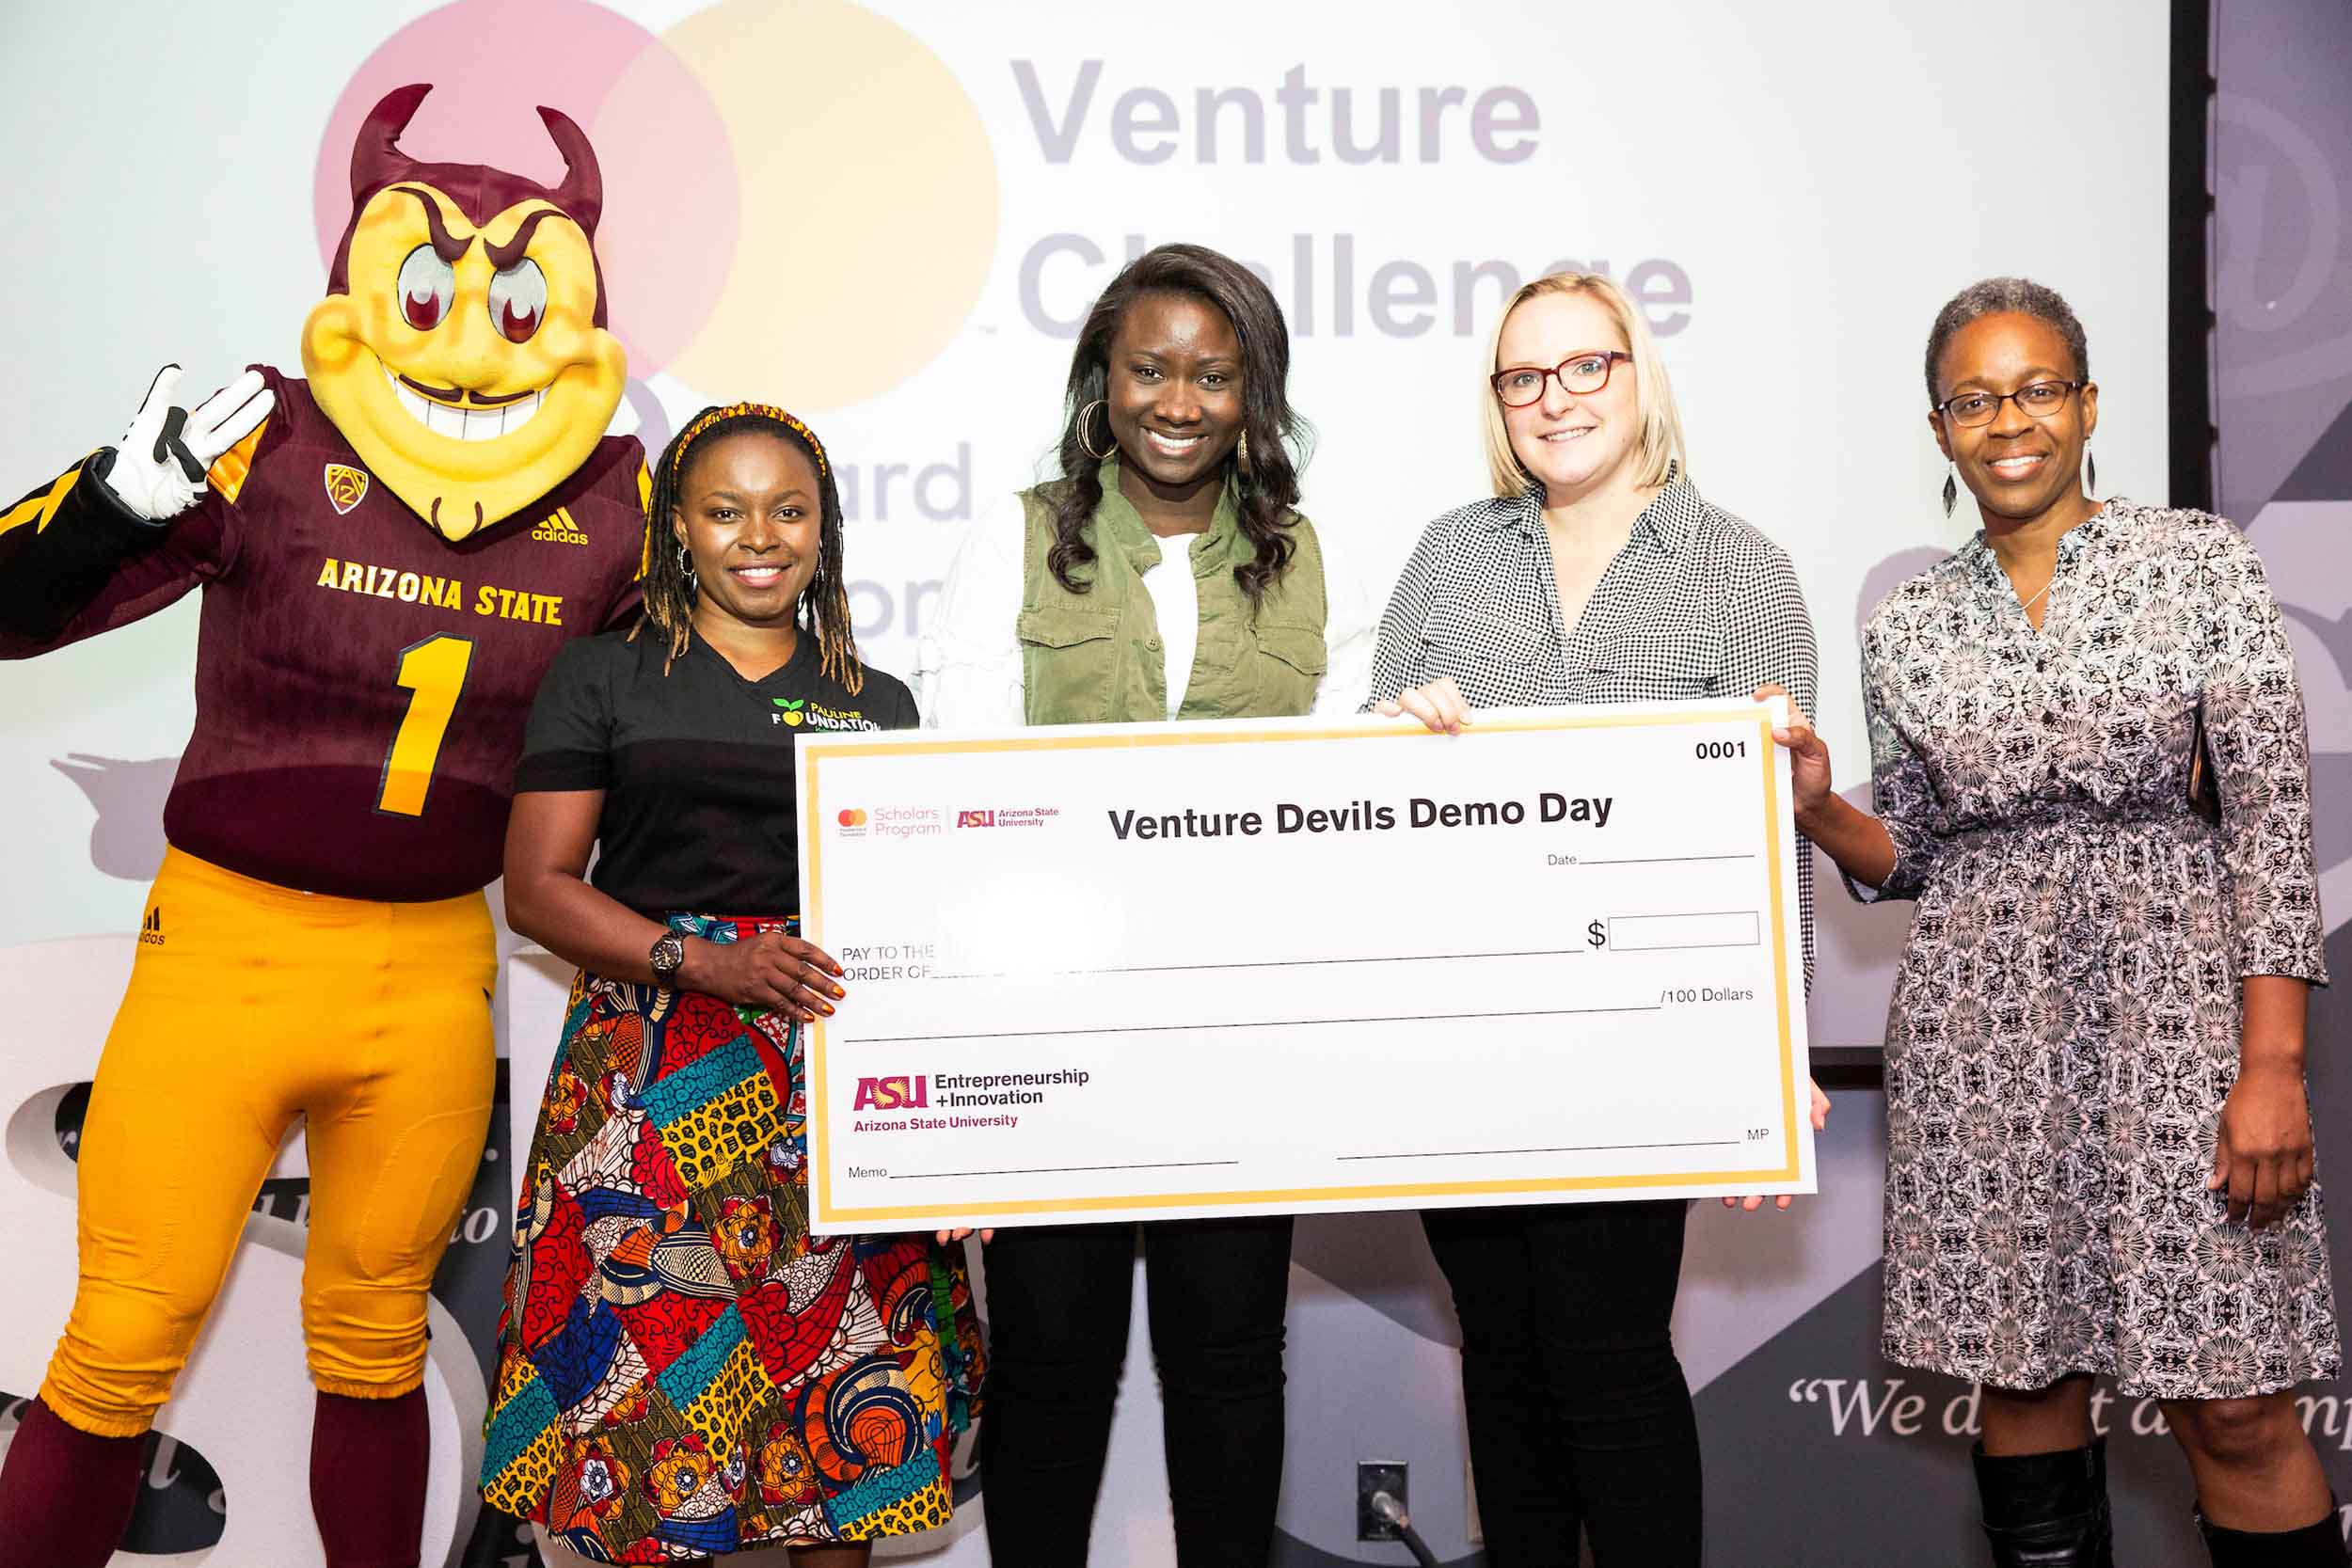 Four women and ASU's mascot, Sparky, stand together holding a gigantic check for Venture Devils Demo Day in April of 2019